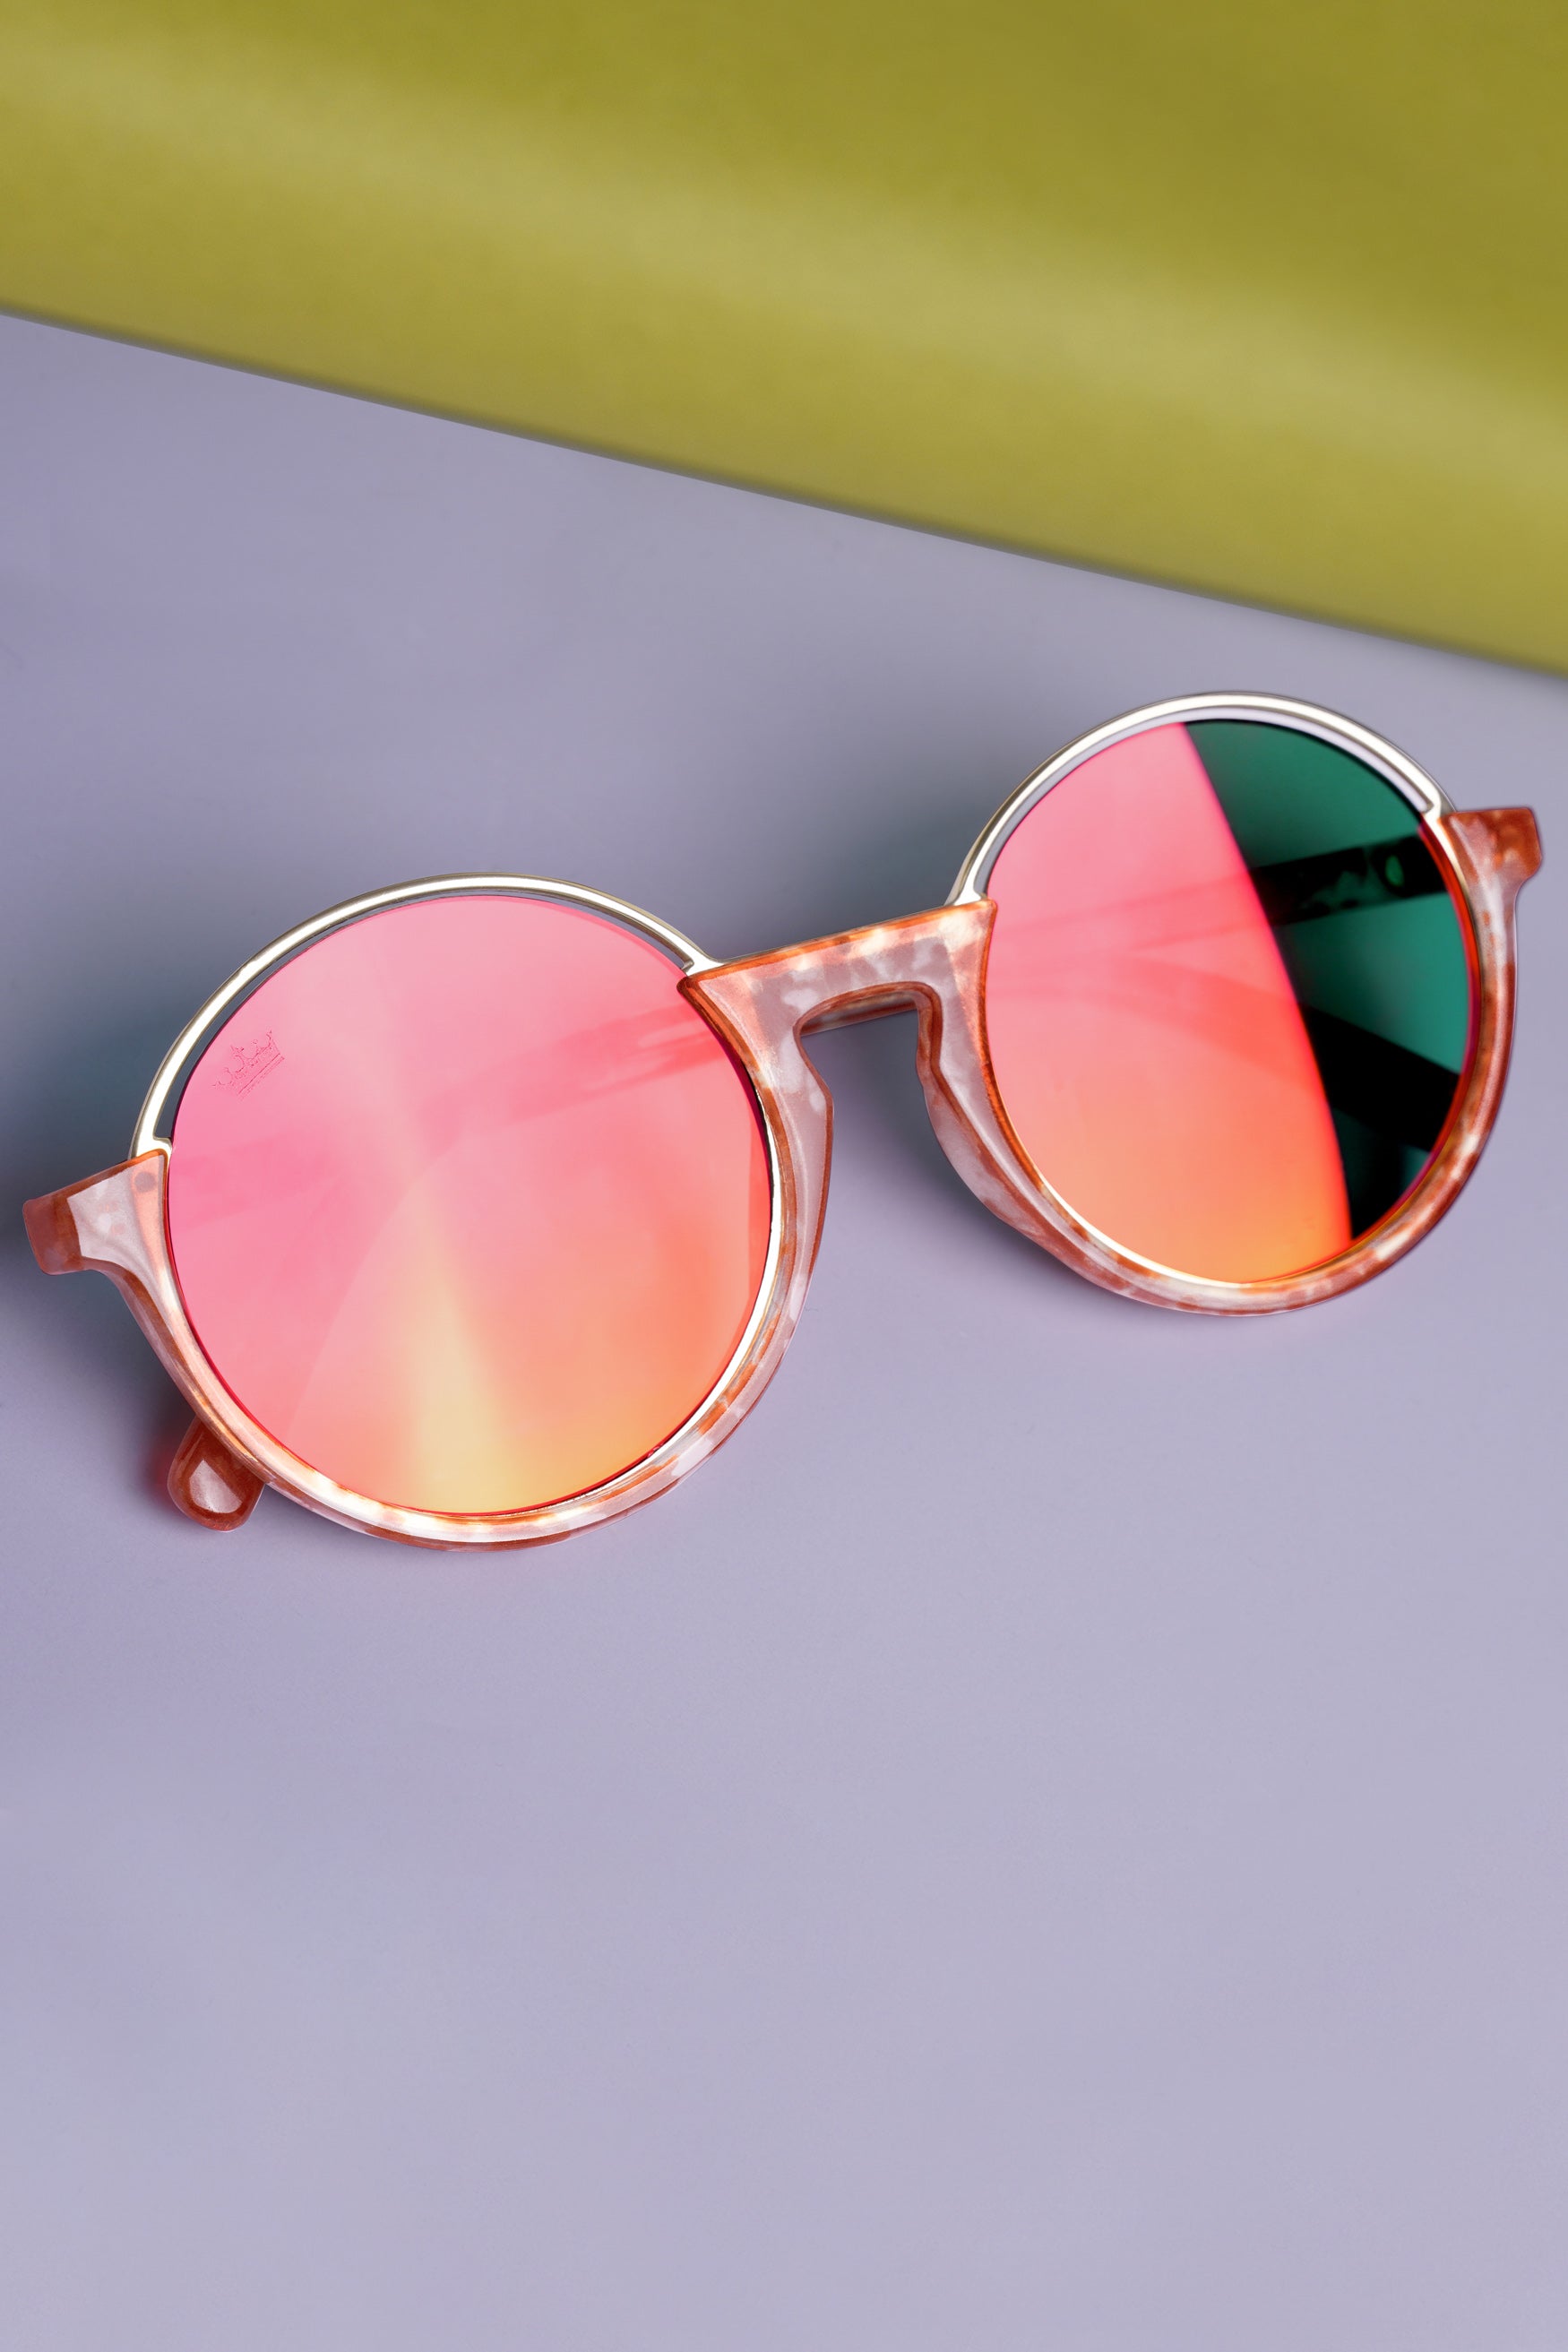 Peach French Crown Round-Shaped Women’s Sunglasses